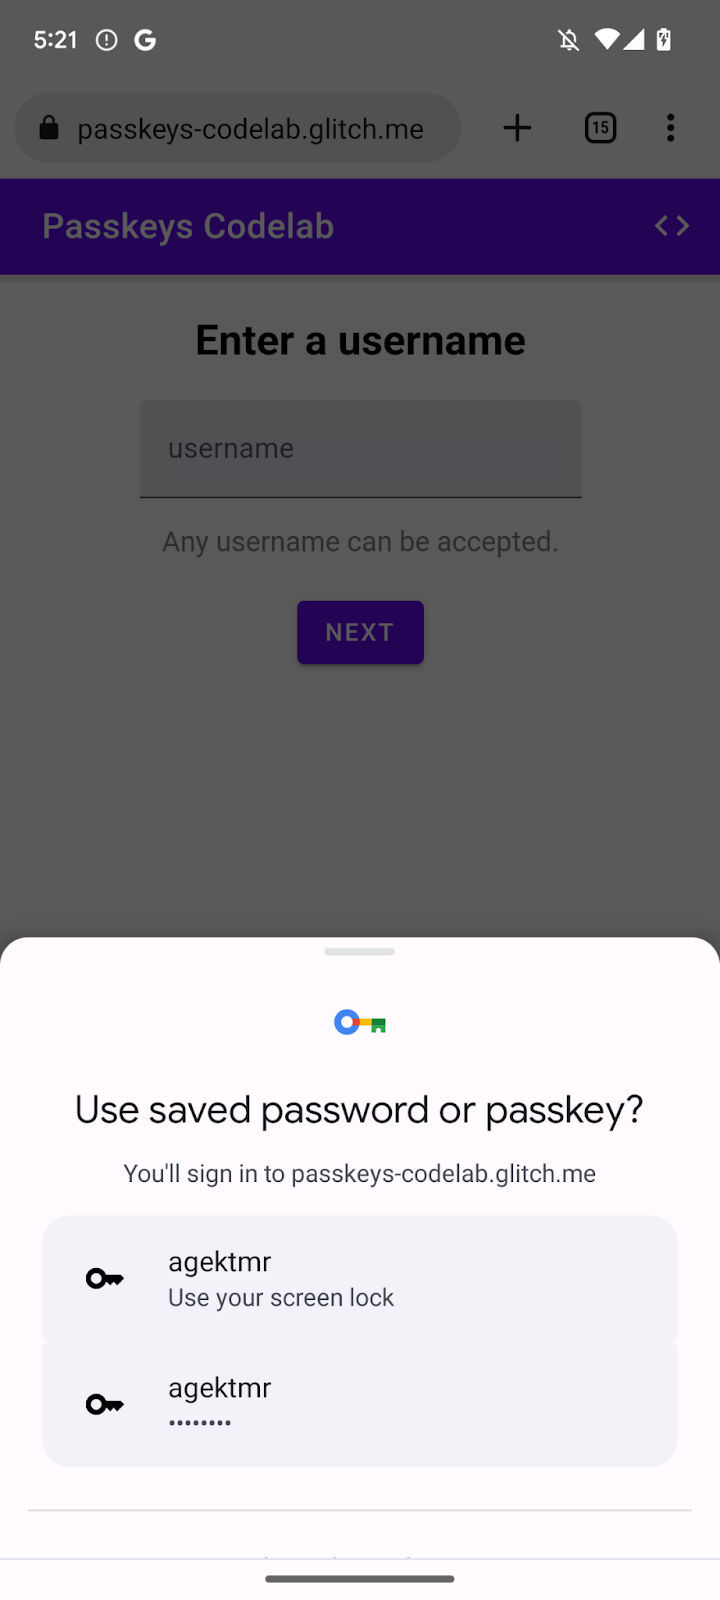 A passkey suggested as part of form autofill.